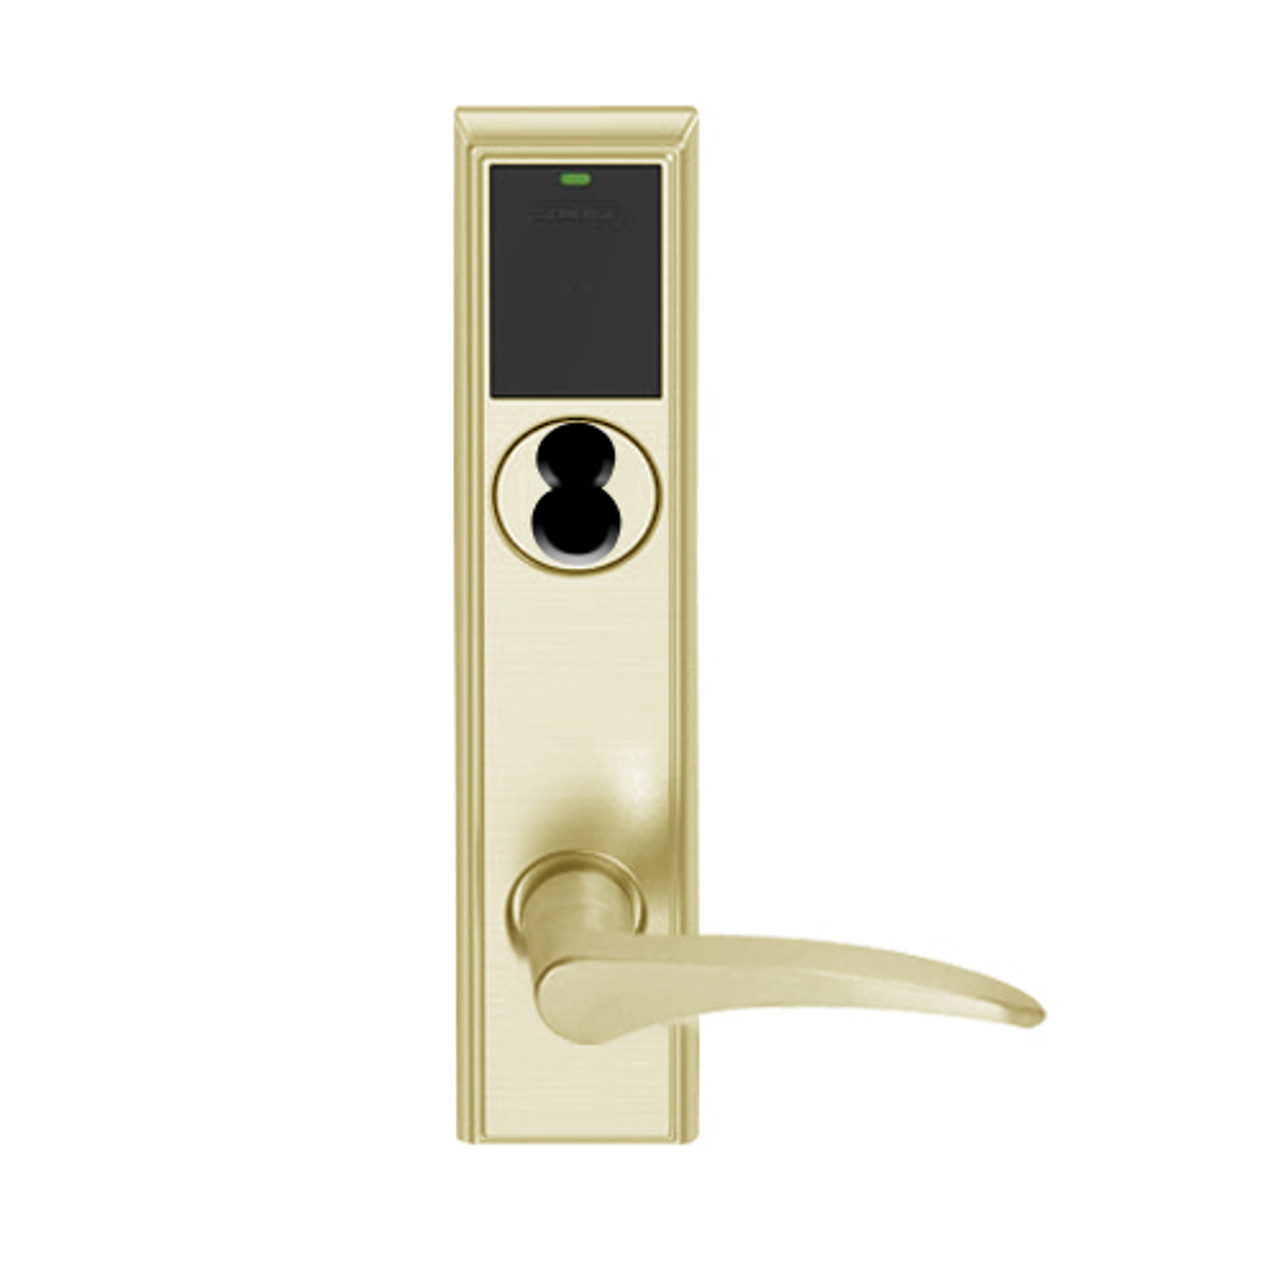 LEMD-ADD-BD-12-606-RH Schlage Privacy/Apartment Wireless Addison Mortise Deadbolt Lock with LED and 12 Lever Prepped for SFIC in Satin Brass